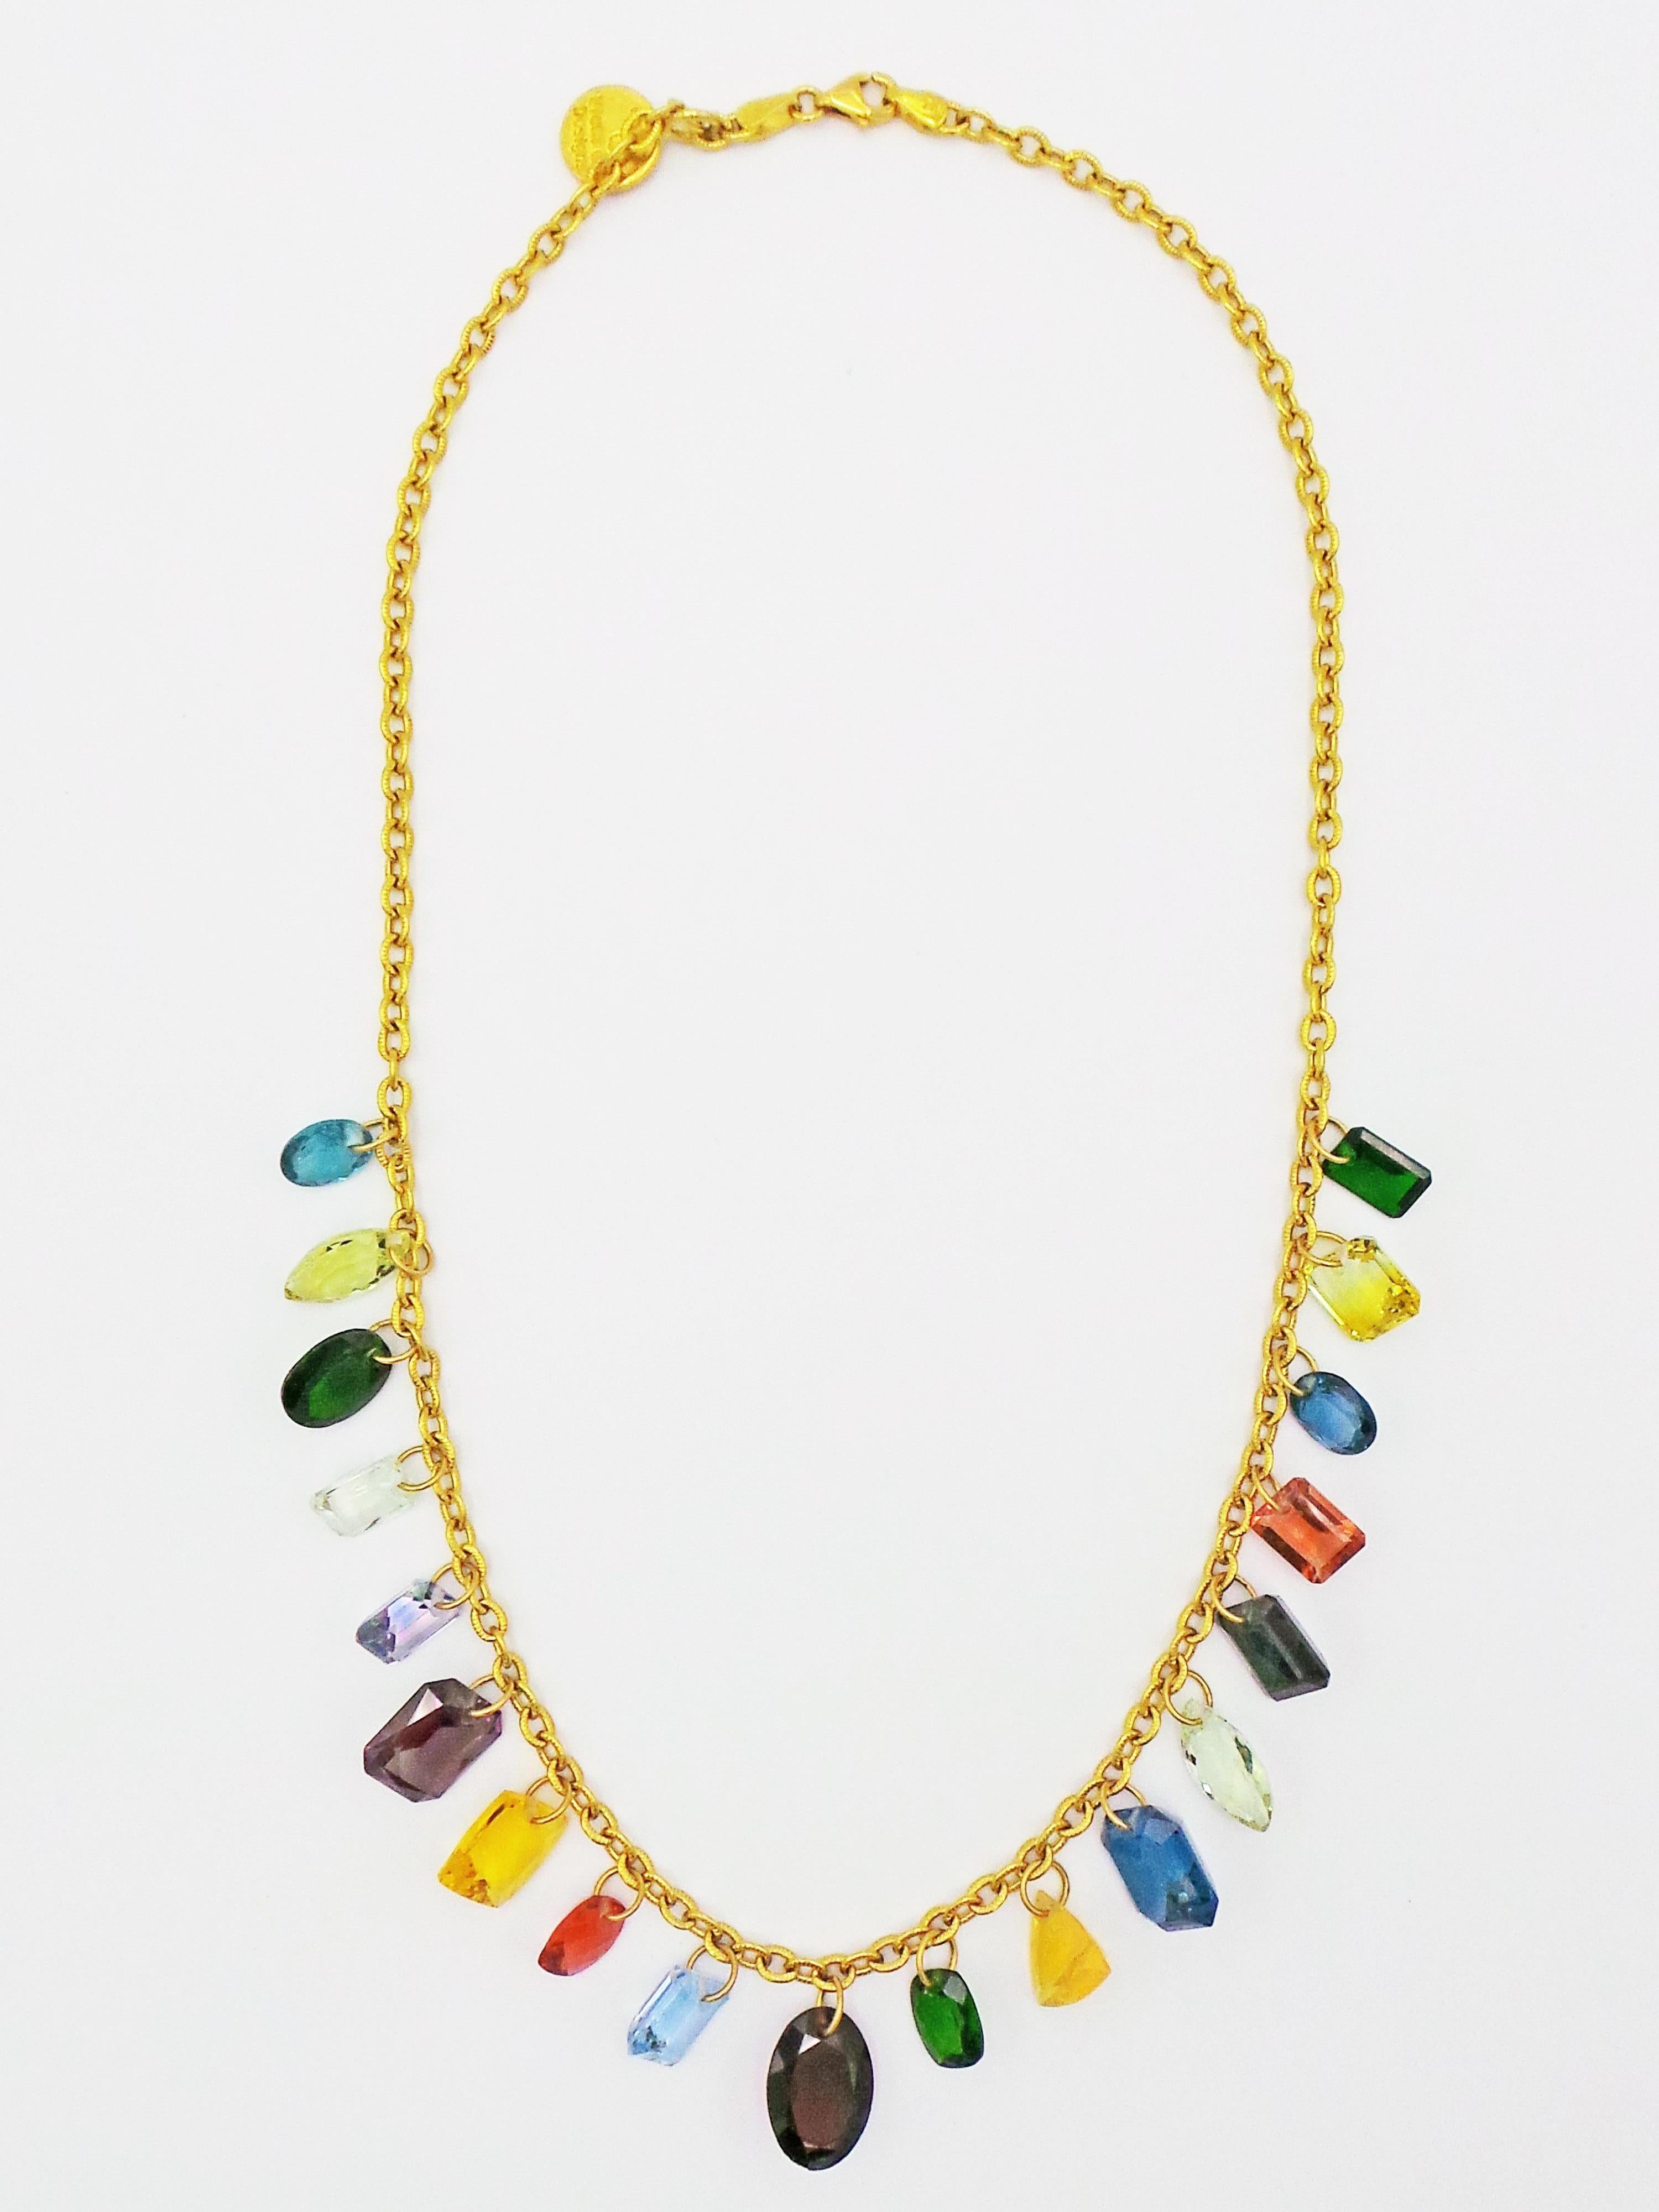 One-of-a-kind, multiple gemstone charms linked on a 22k yellow gold cable chain necklace. There are nineteen drilled gem charms in this necklace including: Topaz, Zircon, Aquamarine, Peridot, Lab-created Alexandrite, Fire Opal, Citrine, Labradorite,